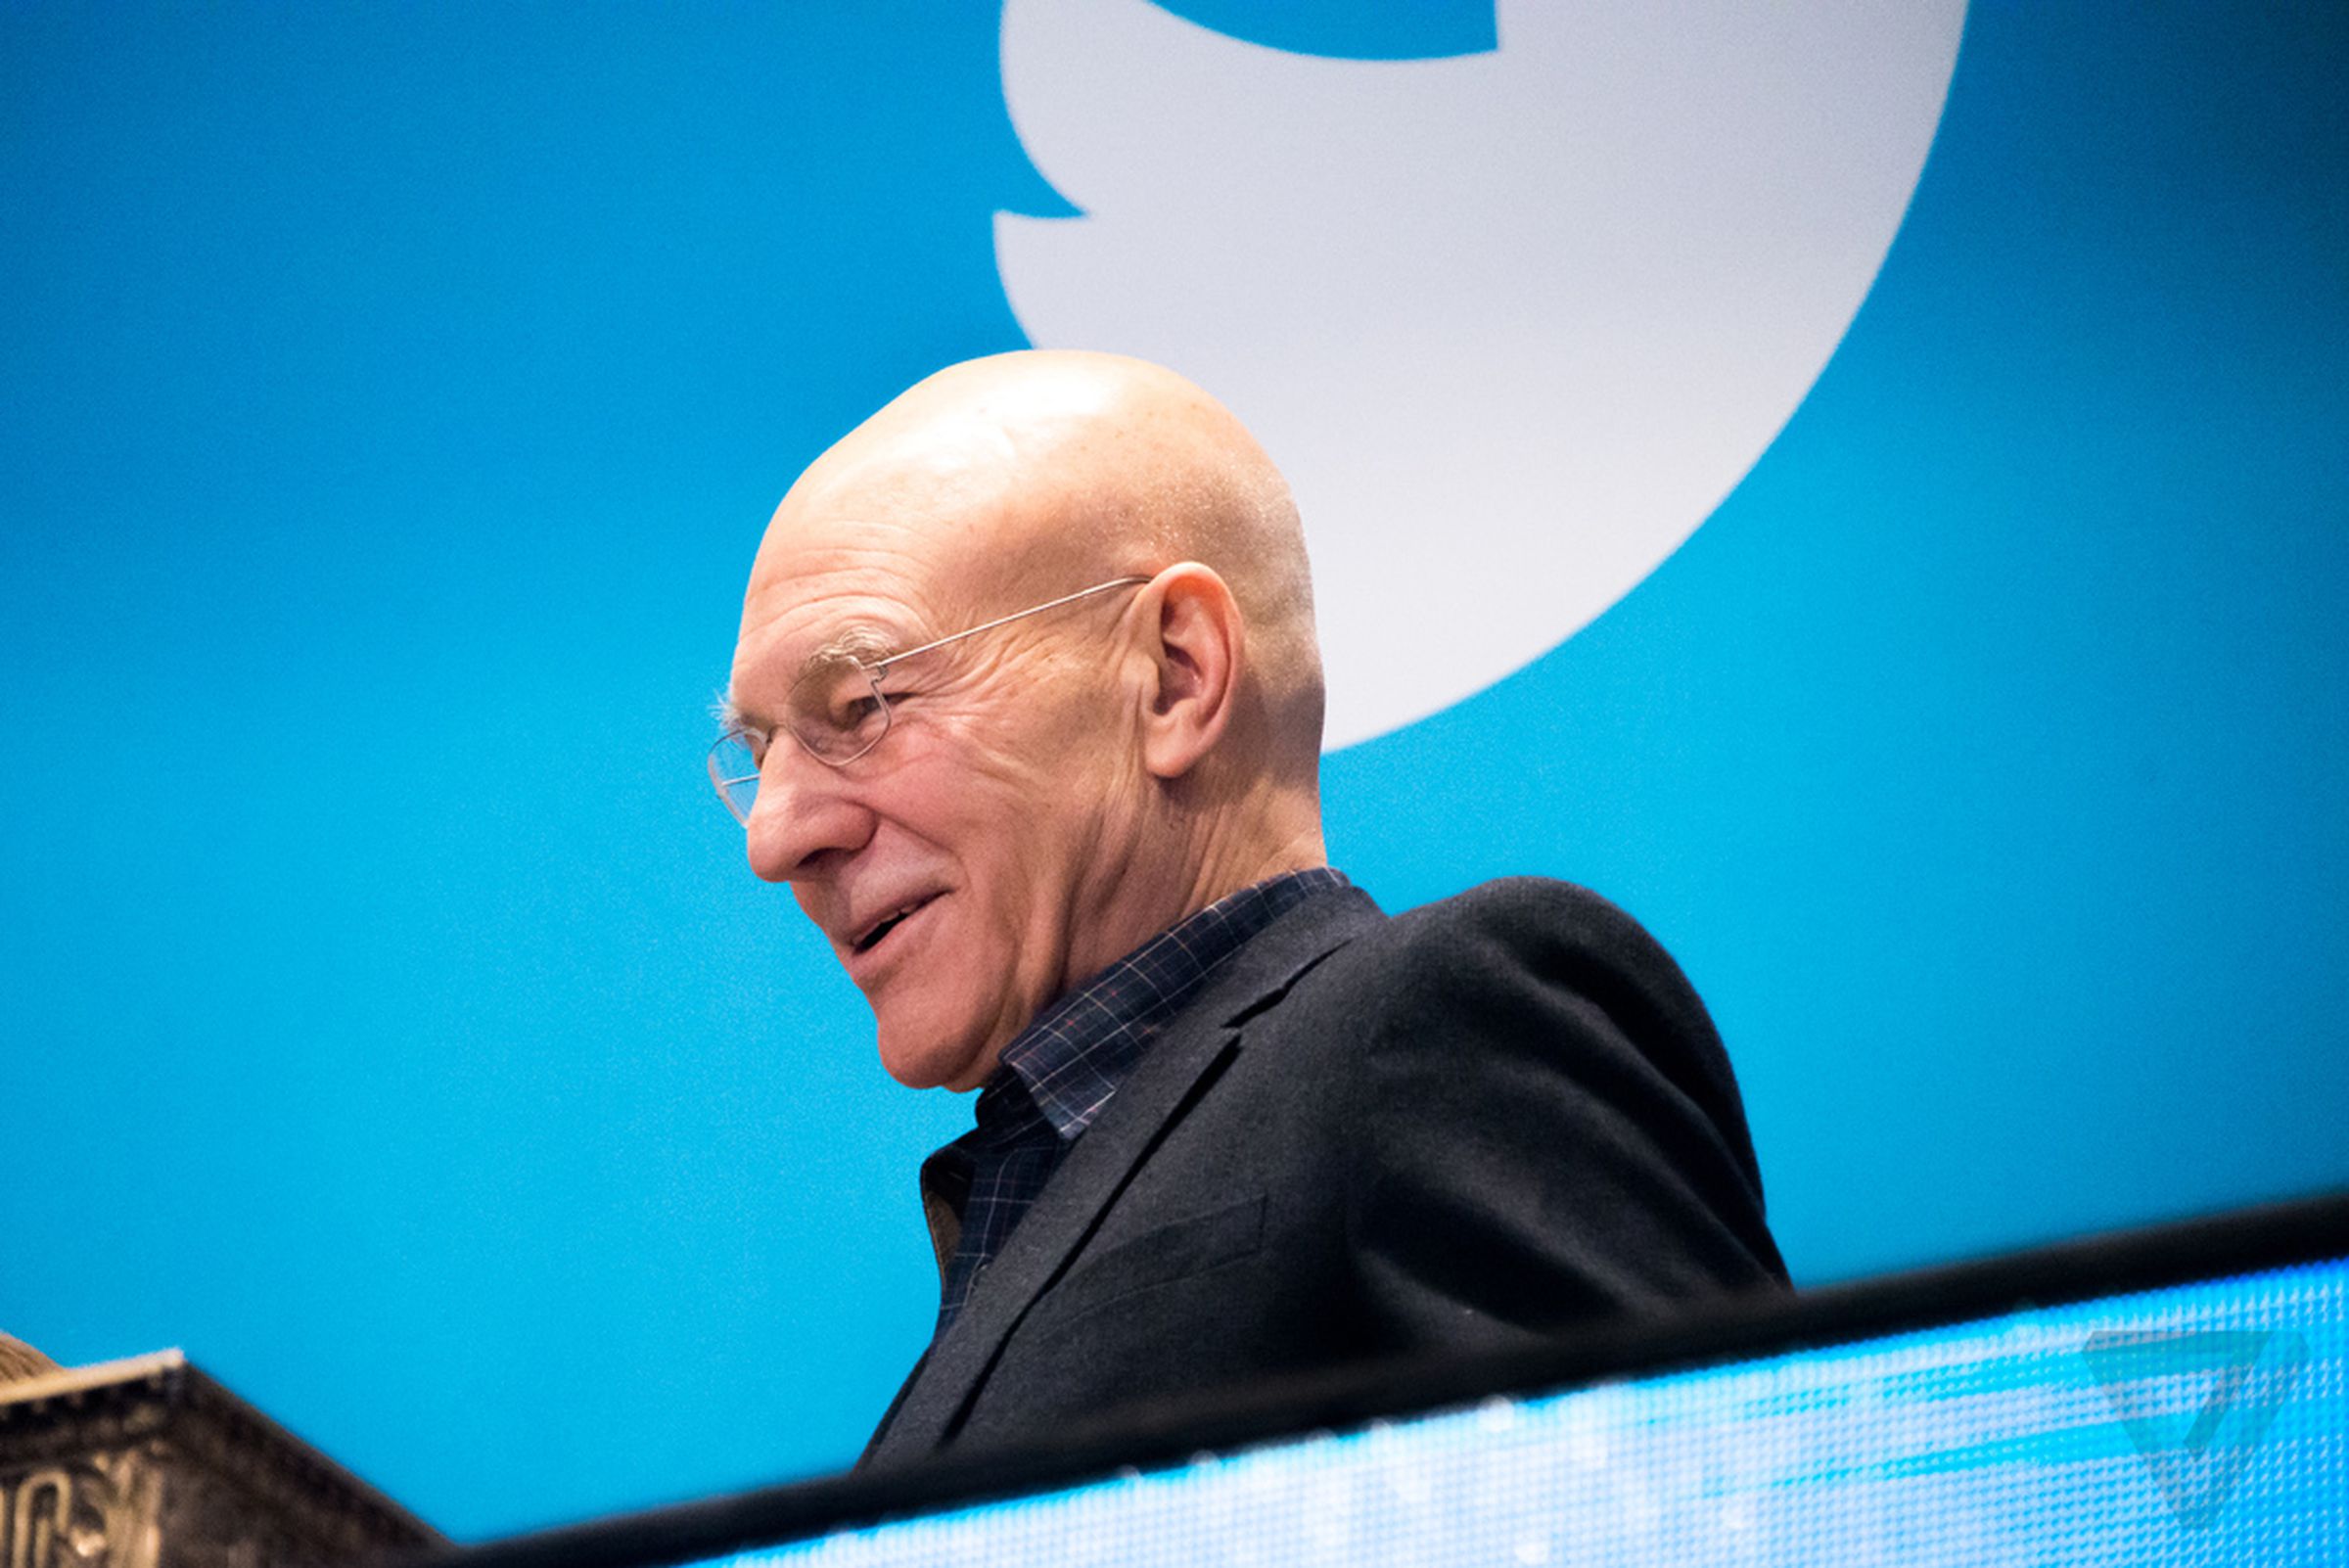 Twitter IPO at The New York Stock Exchange